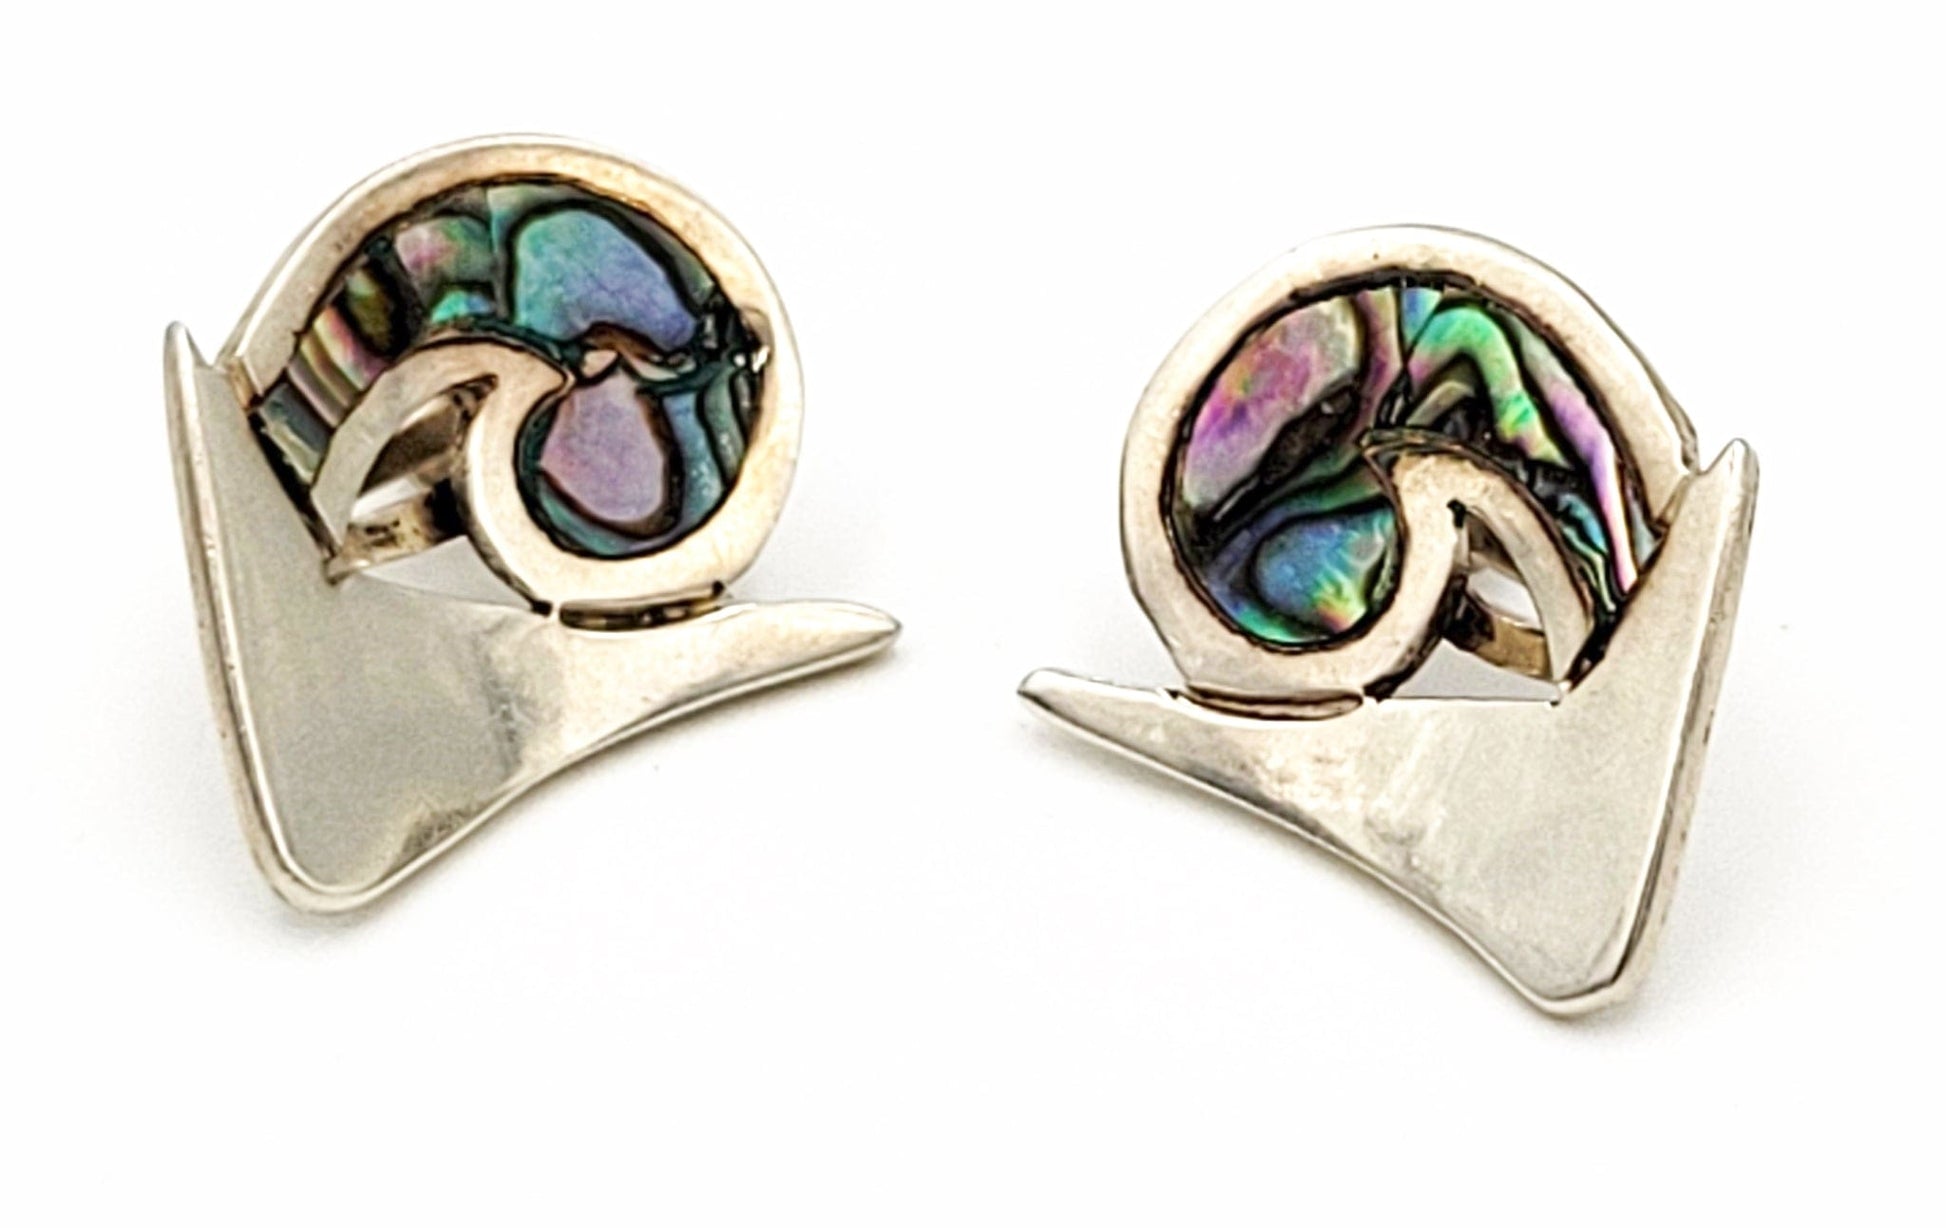 Rancho Alegre Jewelry Stunning Miguel Taxco Rancho Alegre Modernist Sterling Abalone Earrings 50s/60s